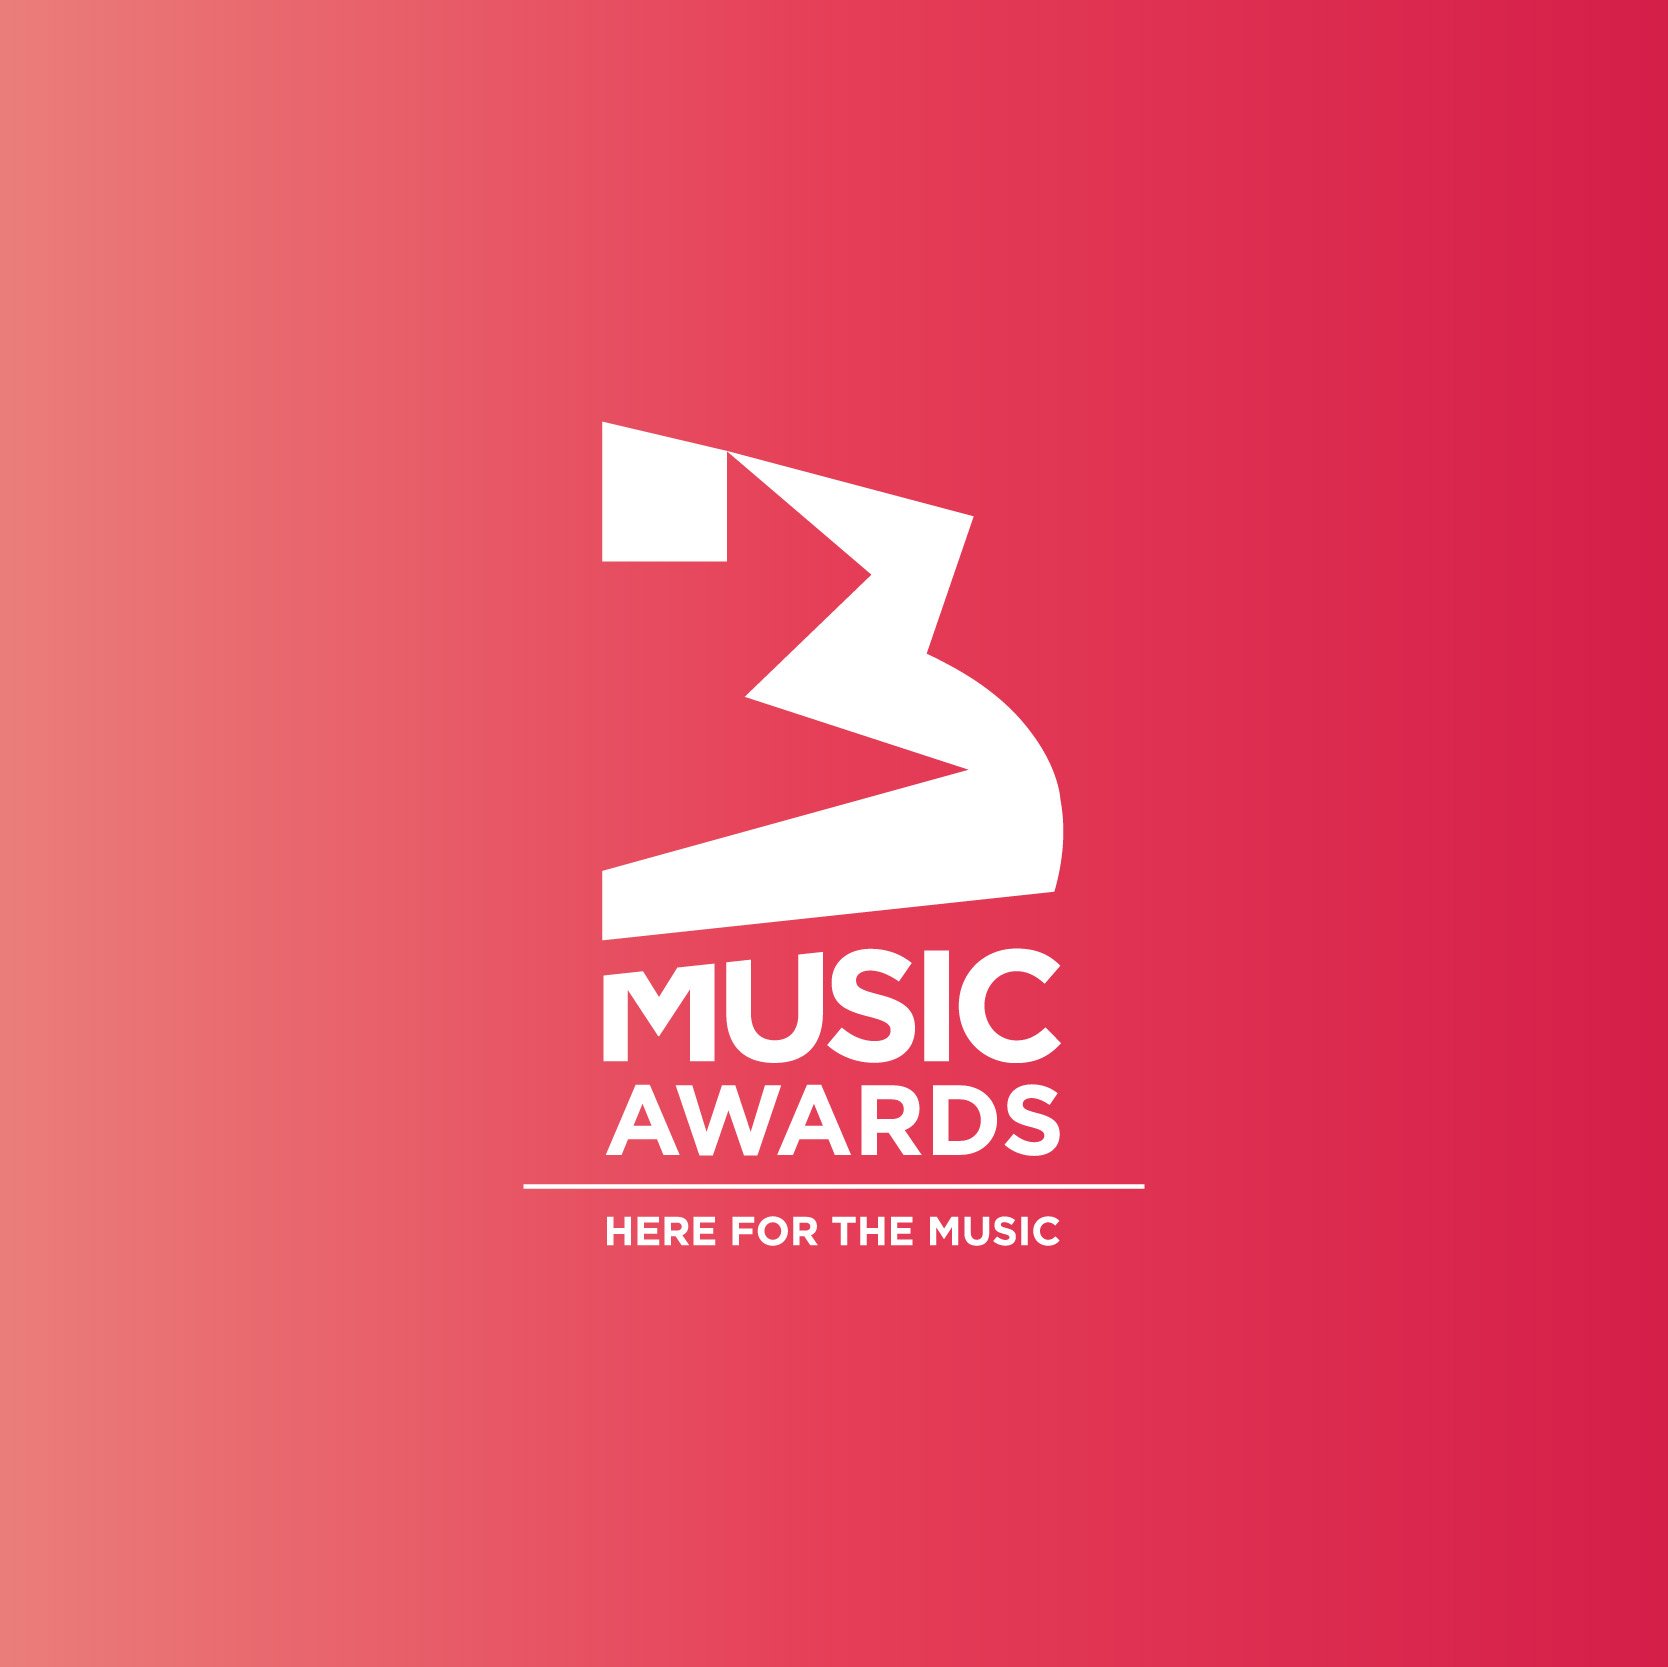 3 Music Awards Presents Categories